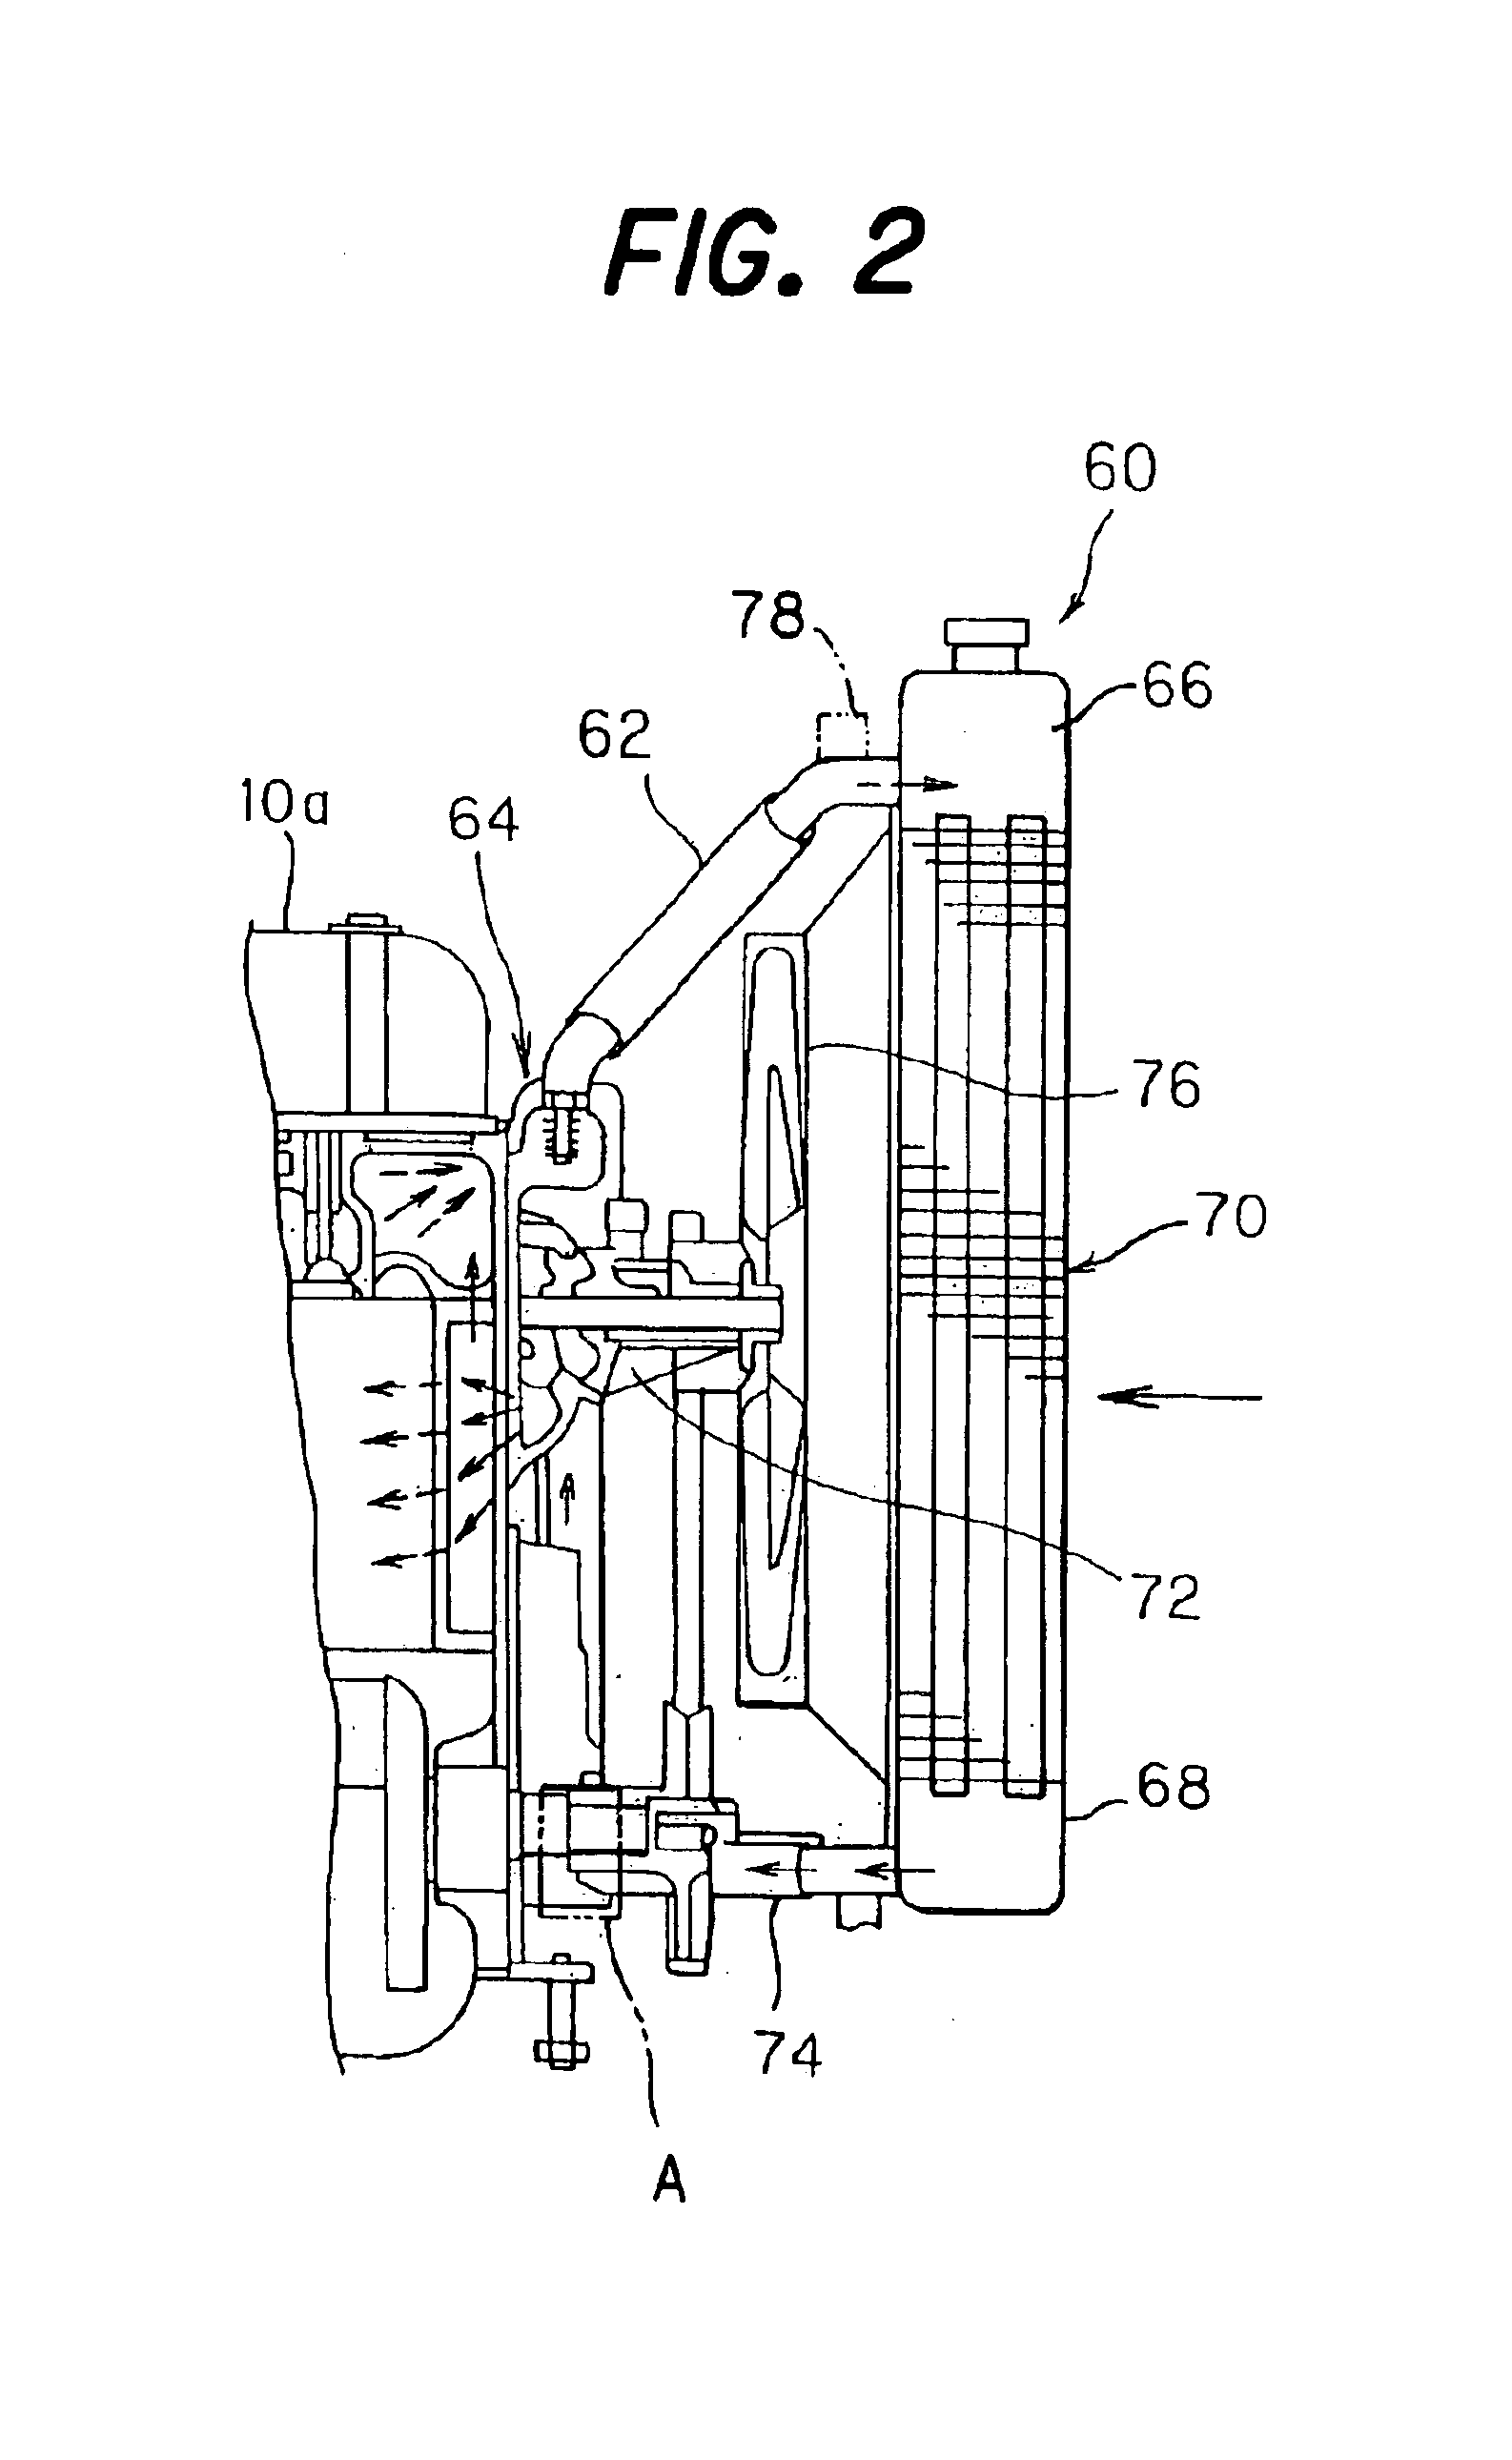 Malfunction detecting system of engine cooling apparatus